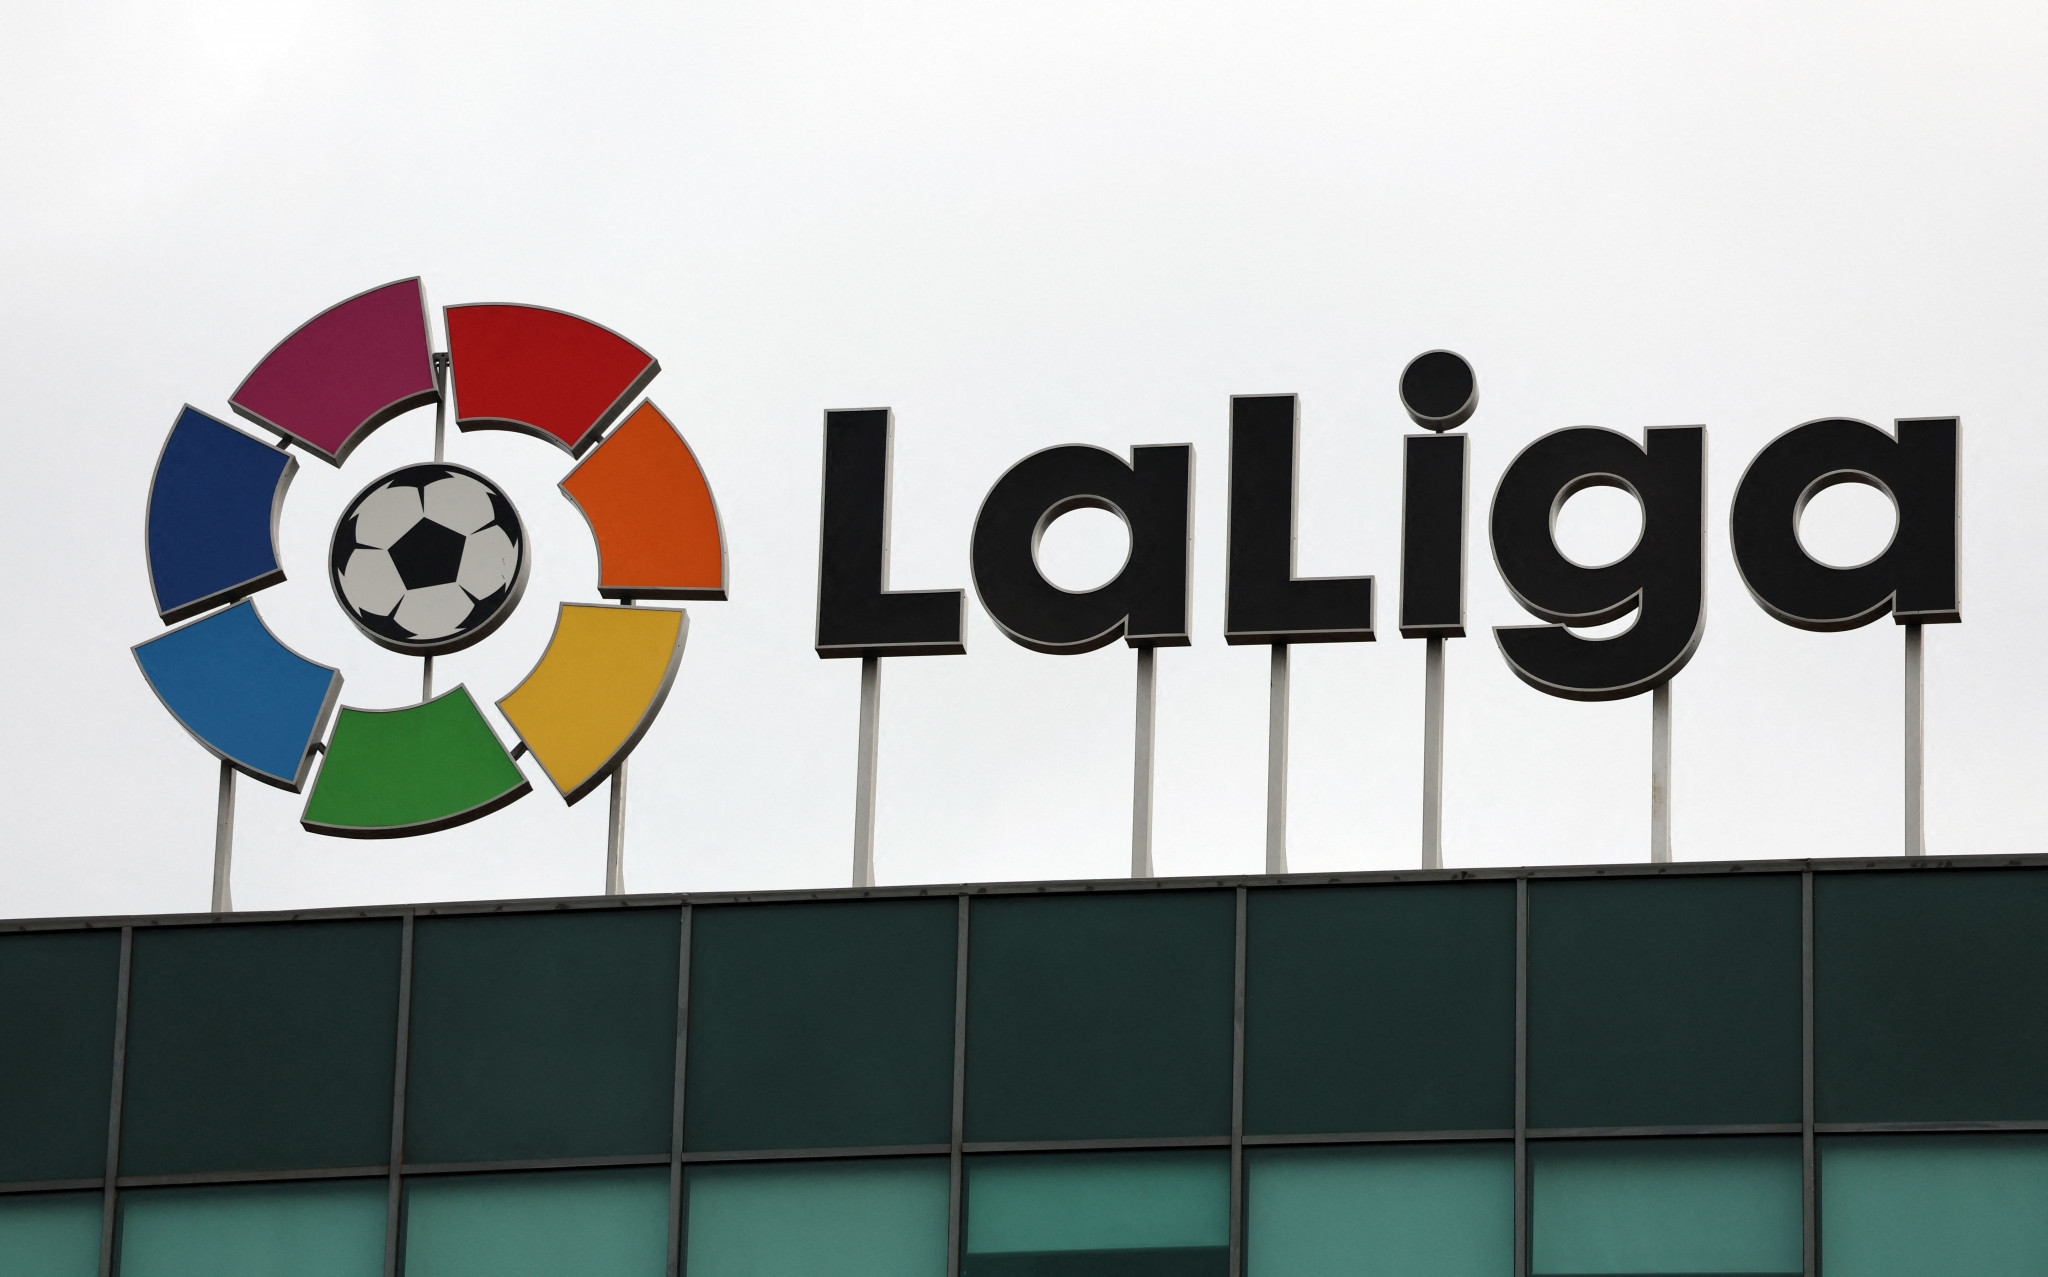 The partnership between Kraków-Małopolska 2023 and LaLiga will help the multi-sport event "get extensive international promotion" ©Getty Images